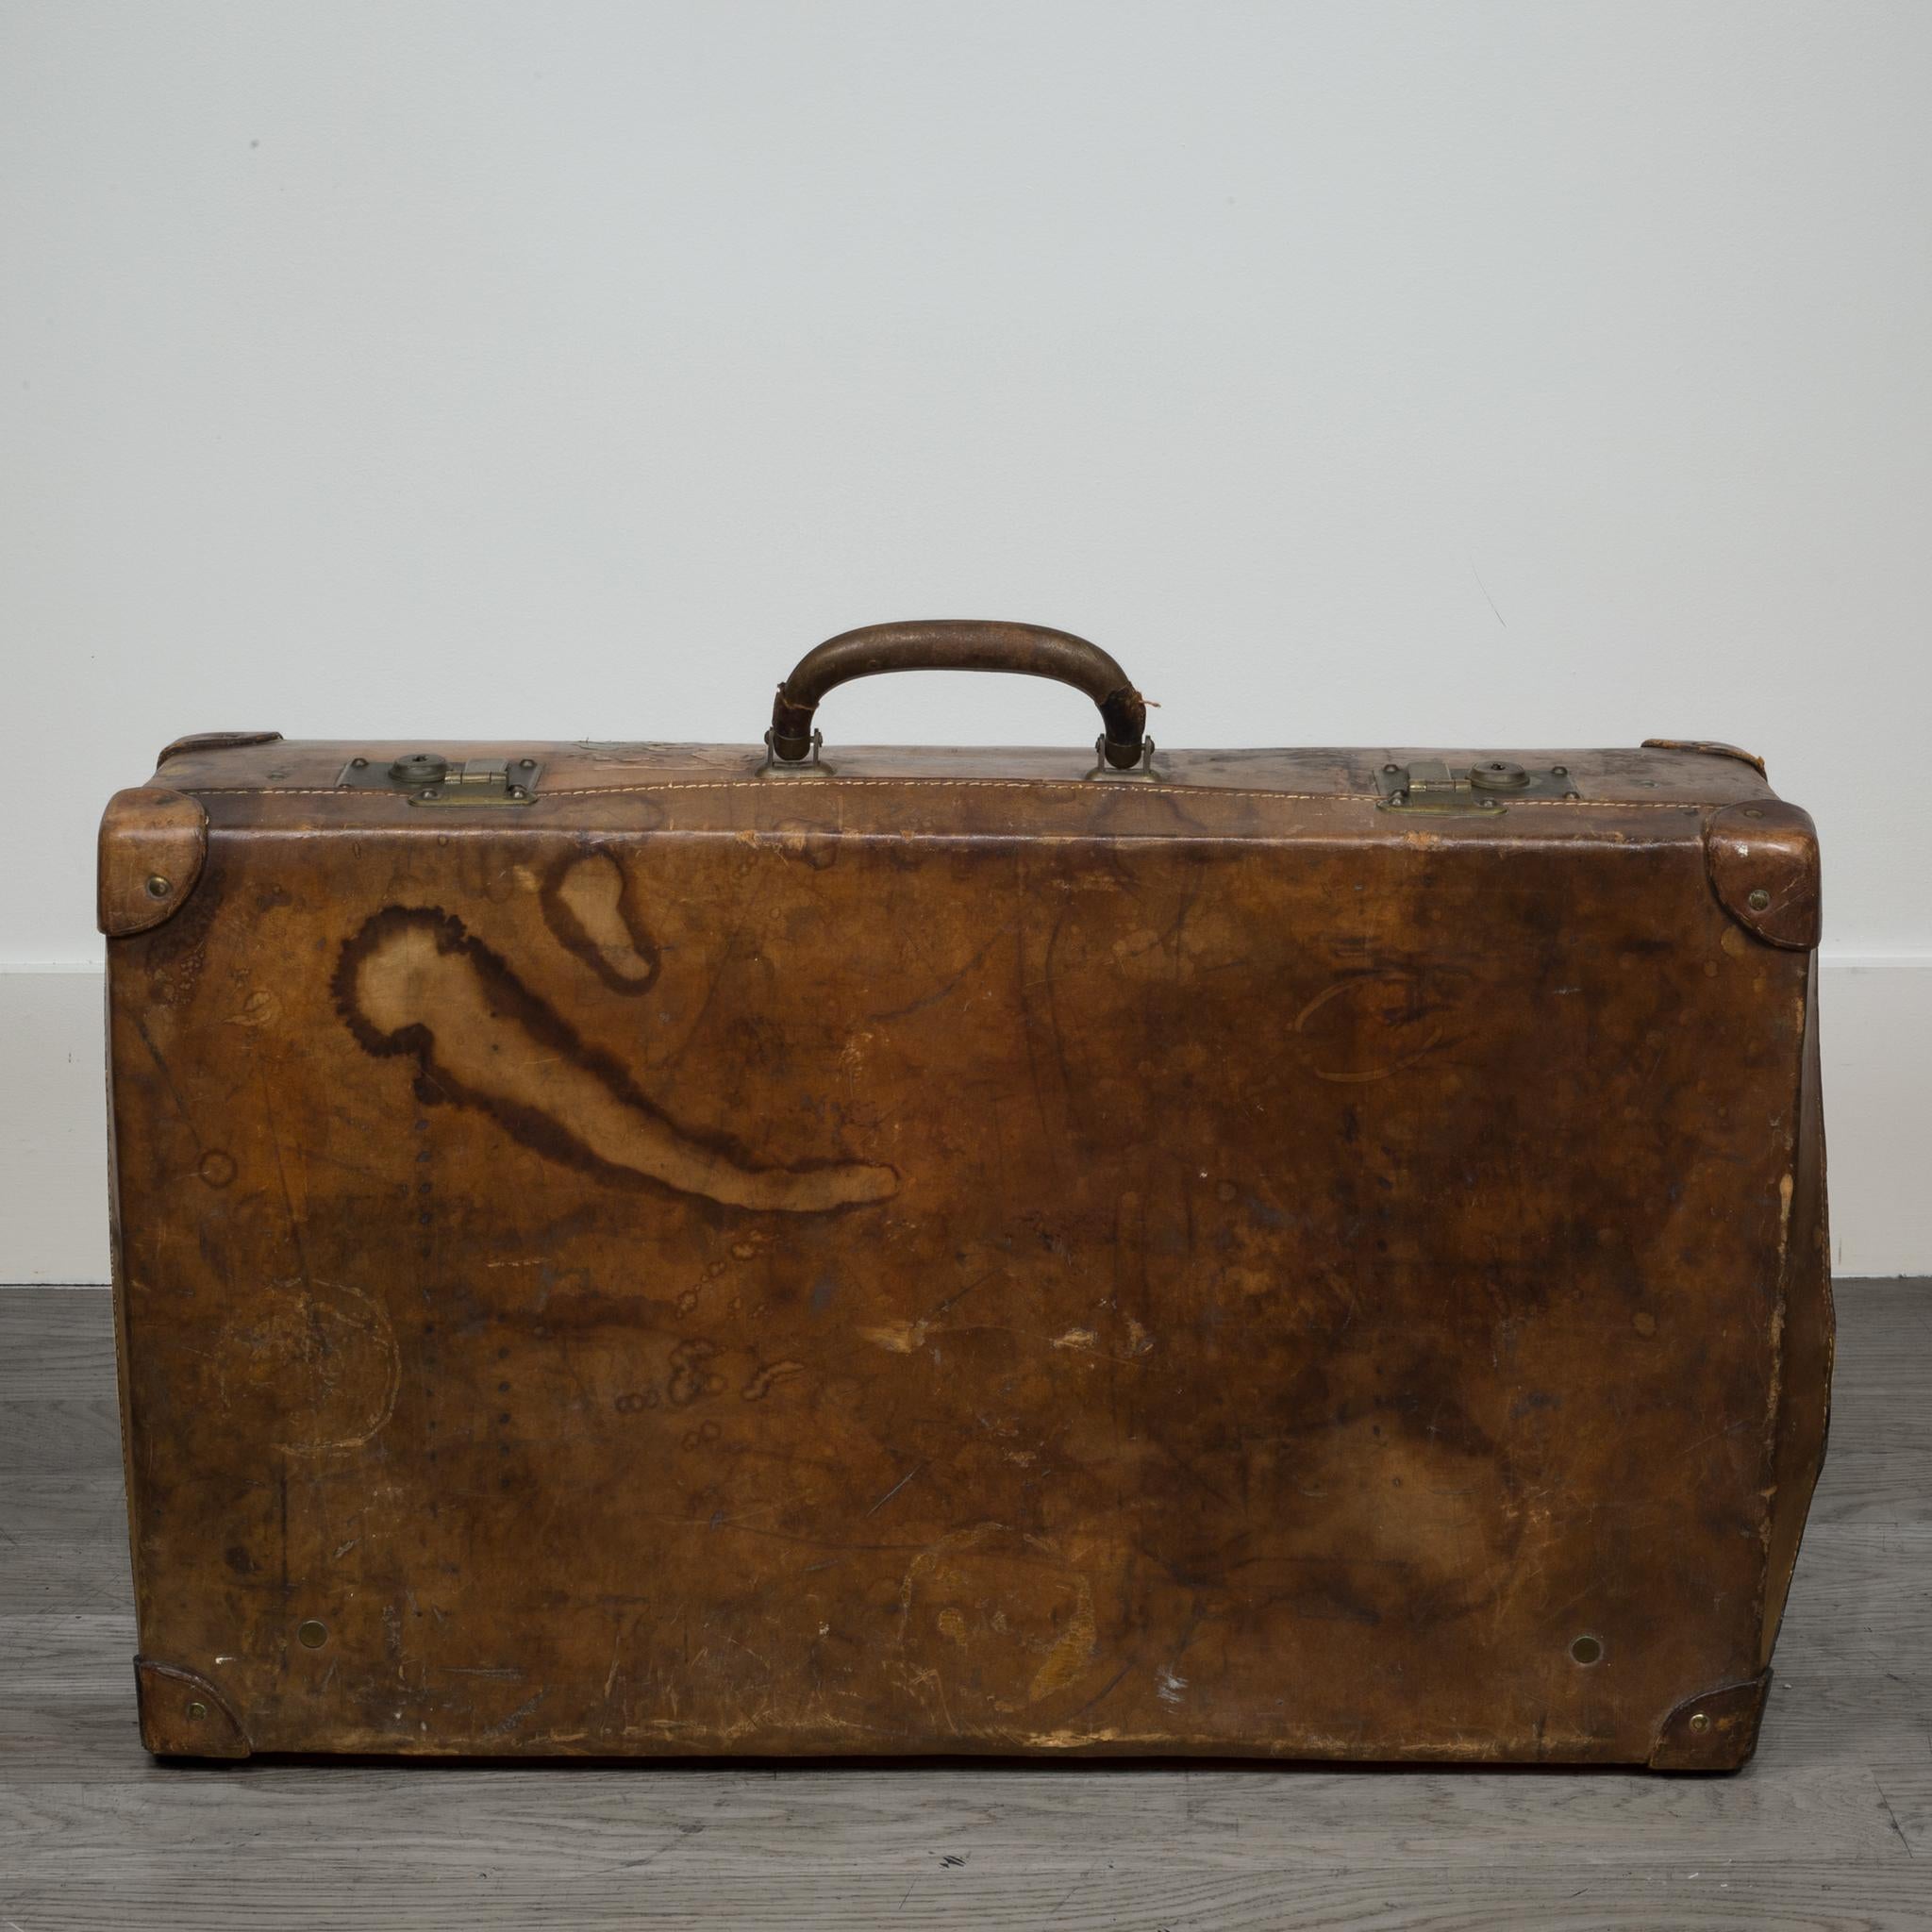 ABOUT
This is an original leather, travel suitcase. The suitcase is all leather with double leather corners, leather handles, brass locks, and detailed whip stitched finishes. The piece has retained its original finish and is in good condition with